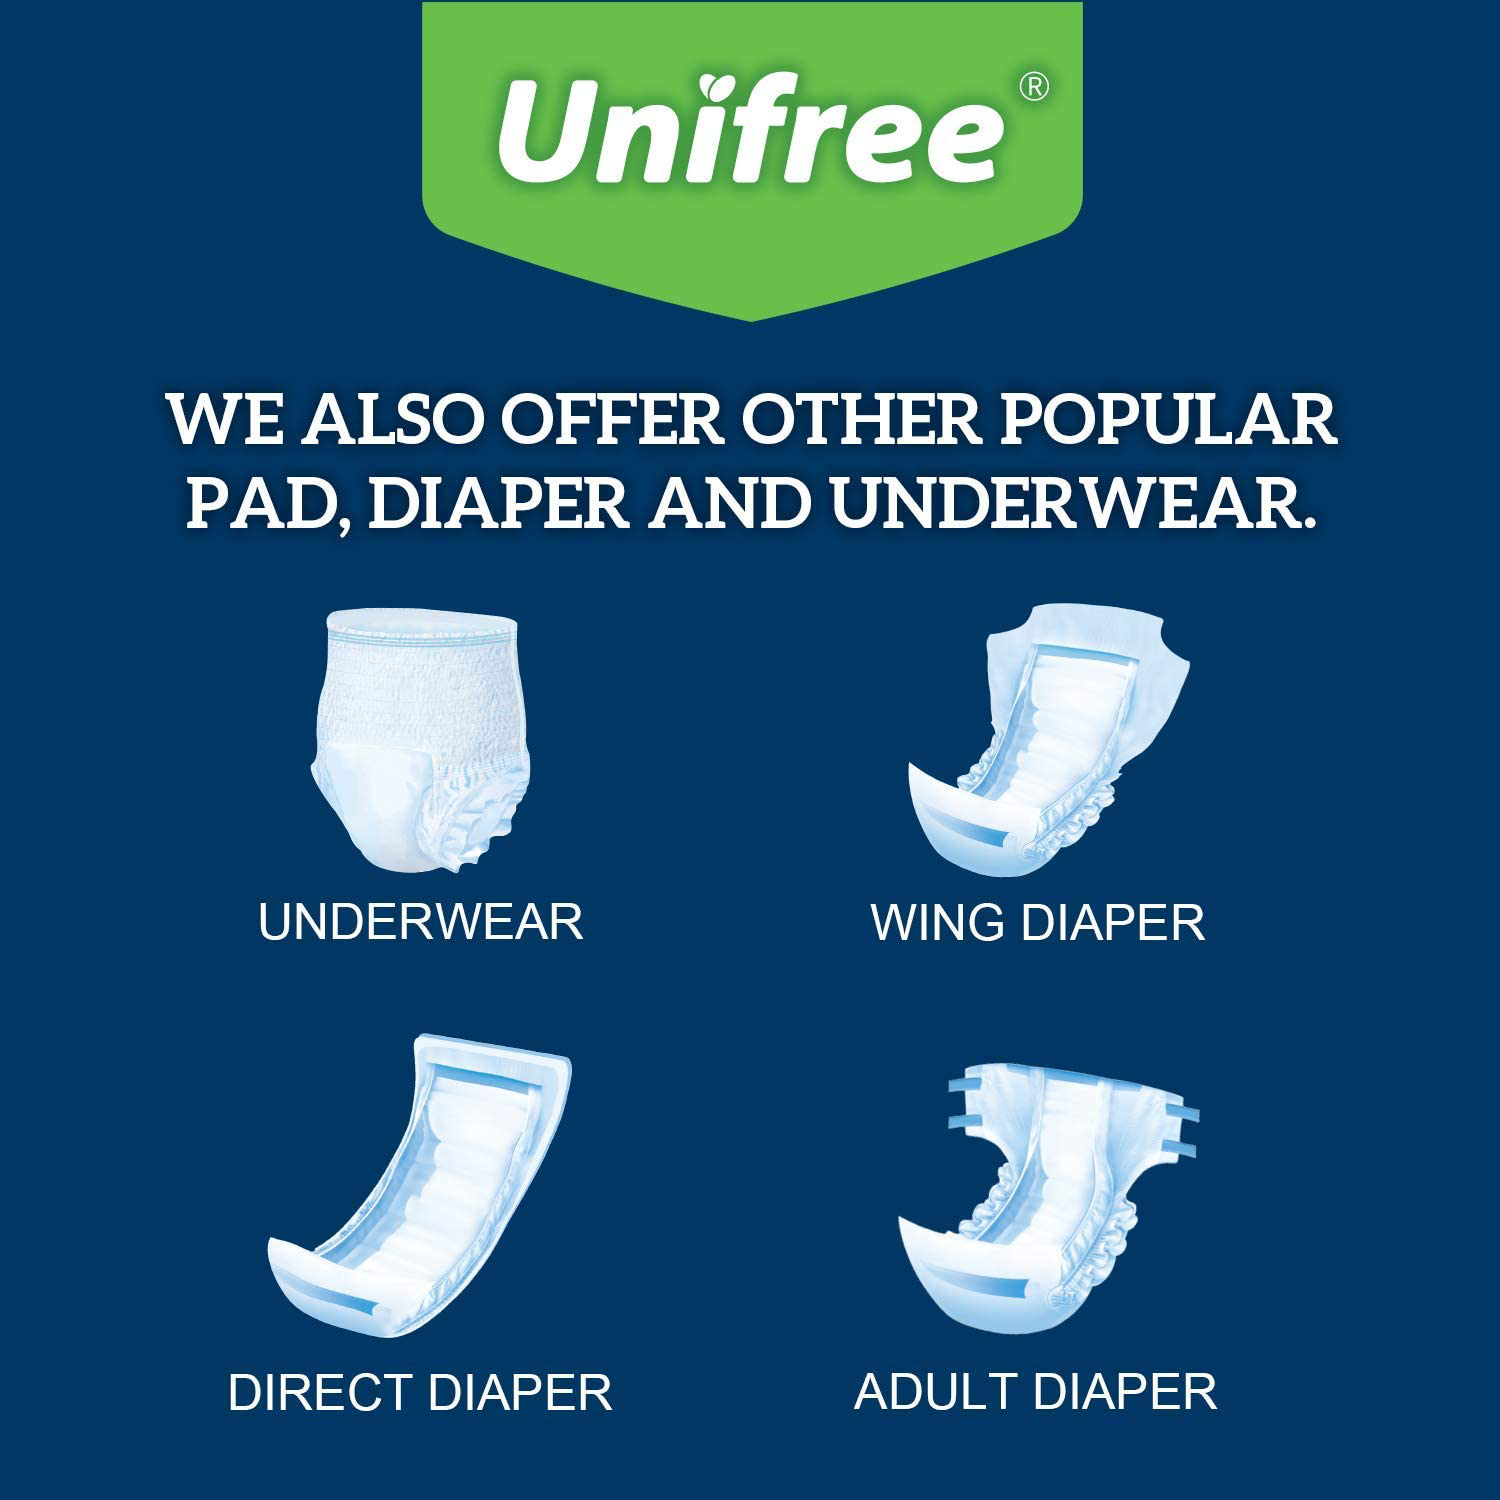 Unifree Disposable Underpads, Bed Pads, Incontinence Pad, Super Absorbent, 150 Count, Blue (S 17.5X23.5 Inch) Animals & Pet Supplies > Pet Supplies > Dog Supplies > Dog Diaper Pads & Liners UNIFREE   